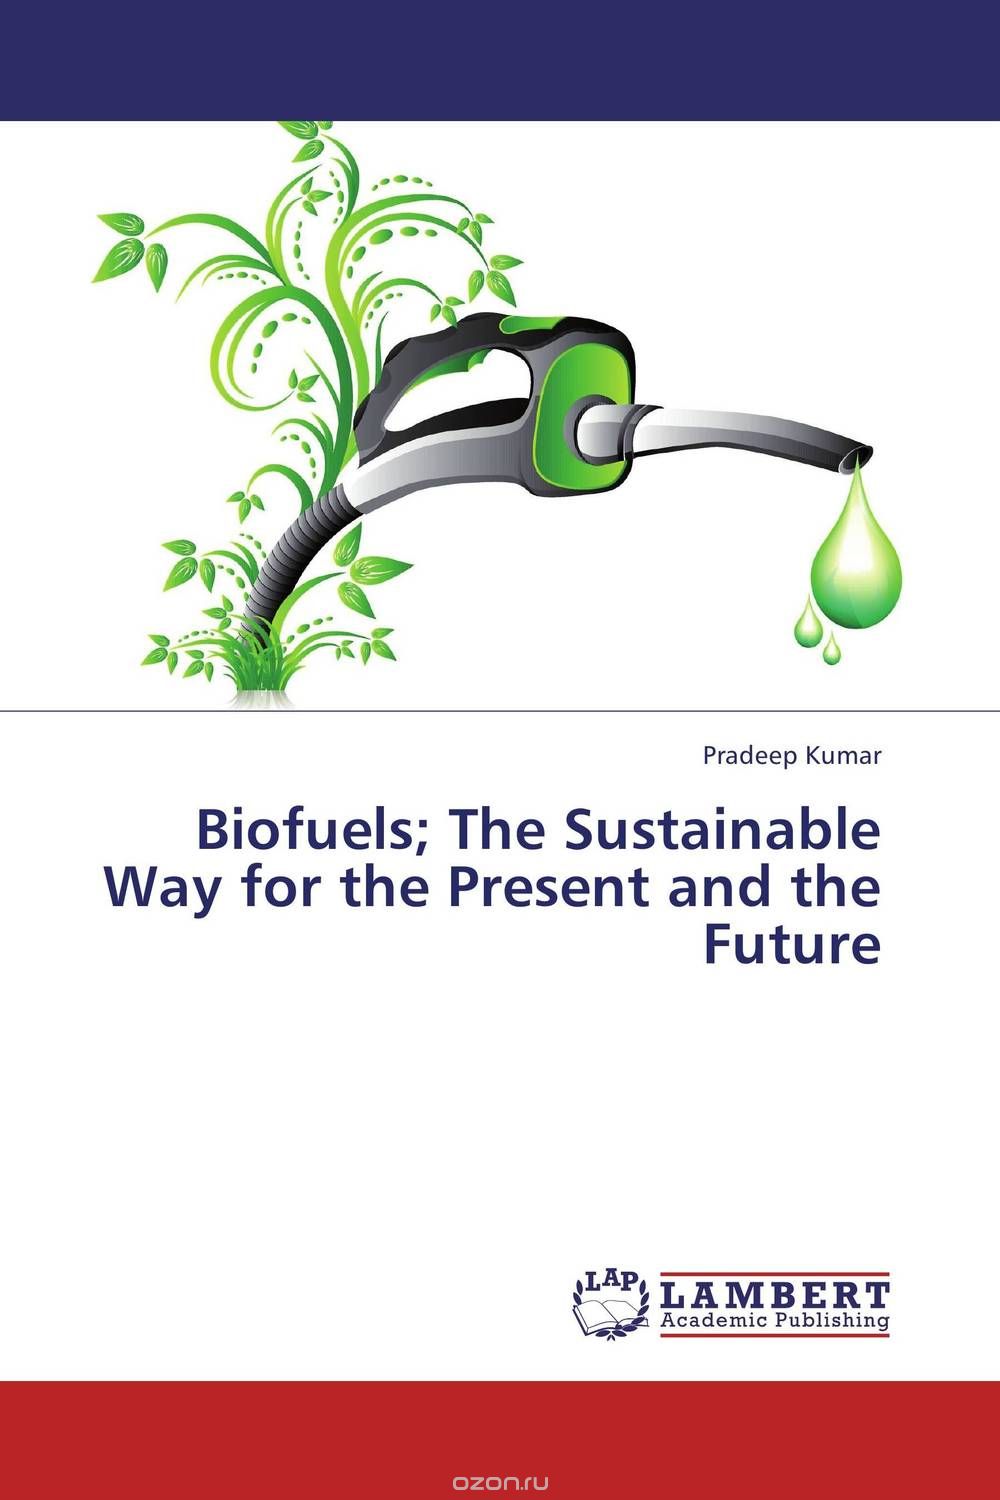 Скачать книгу "Biofuels; The Sustainable Way for the Present and the Future"